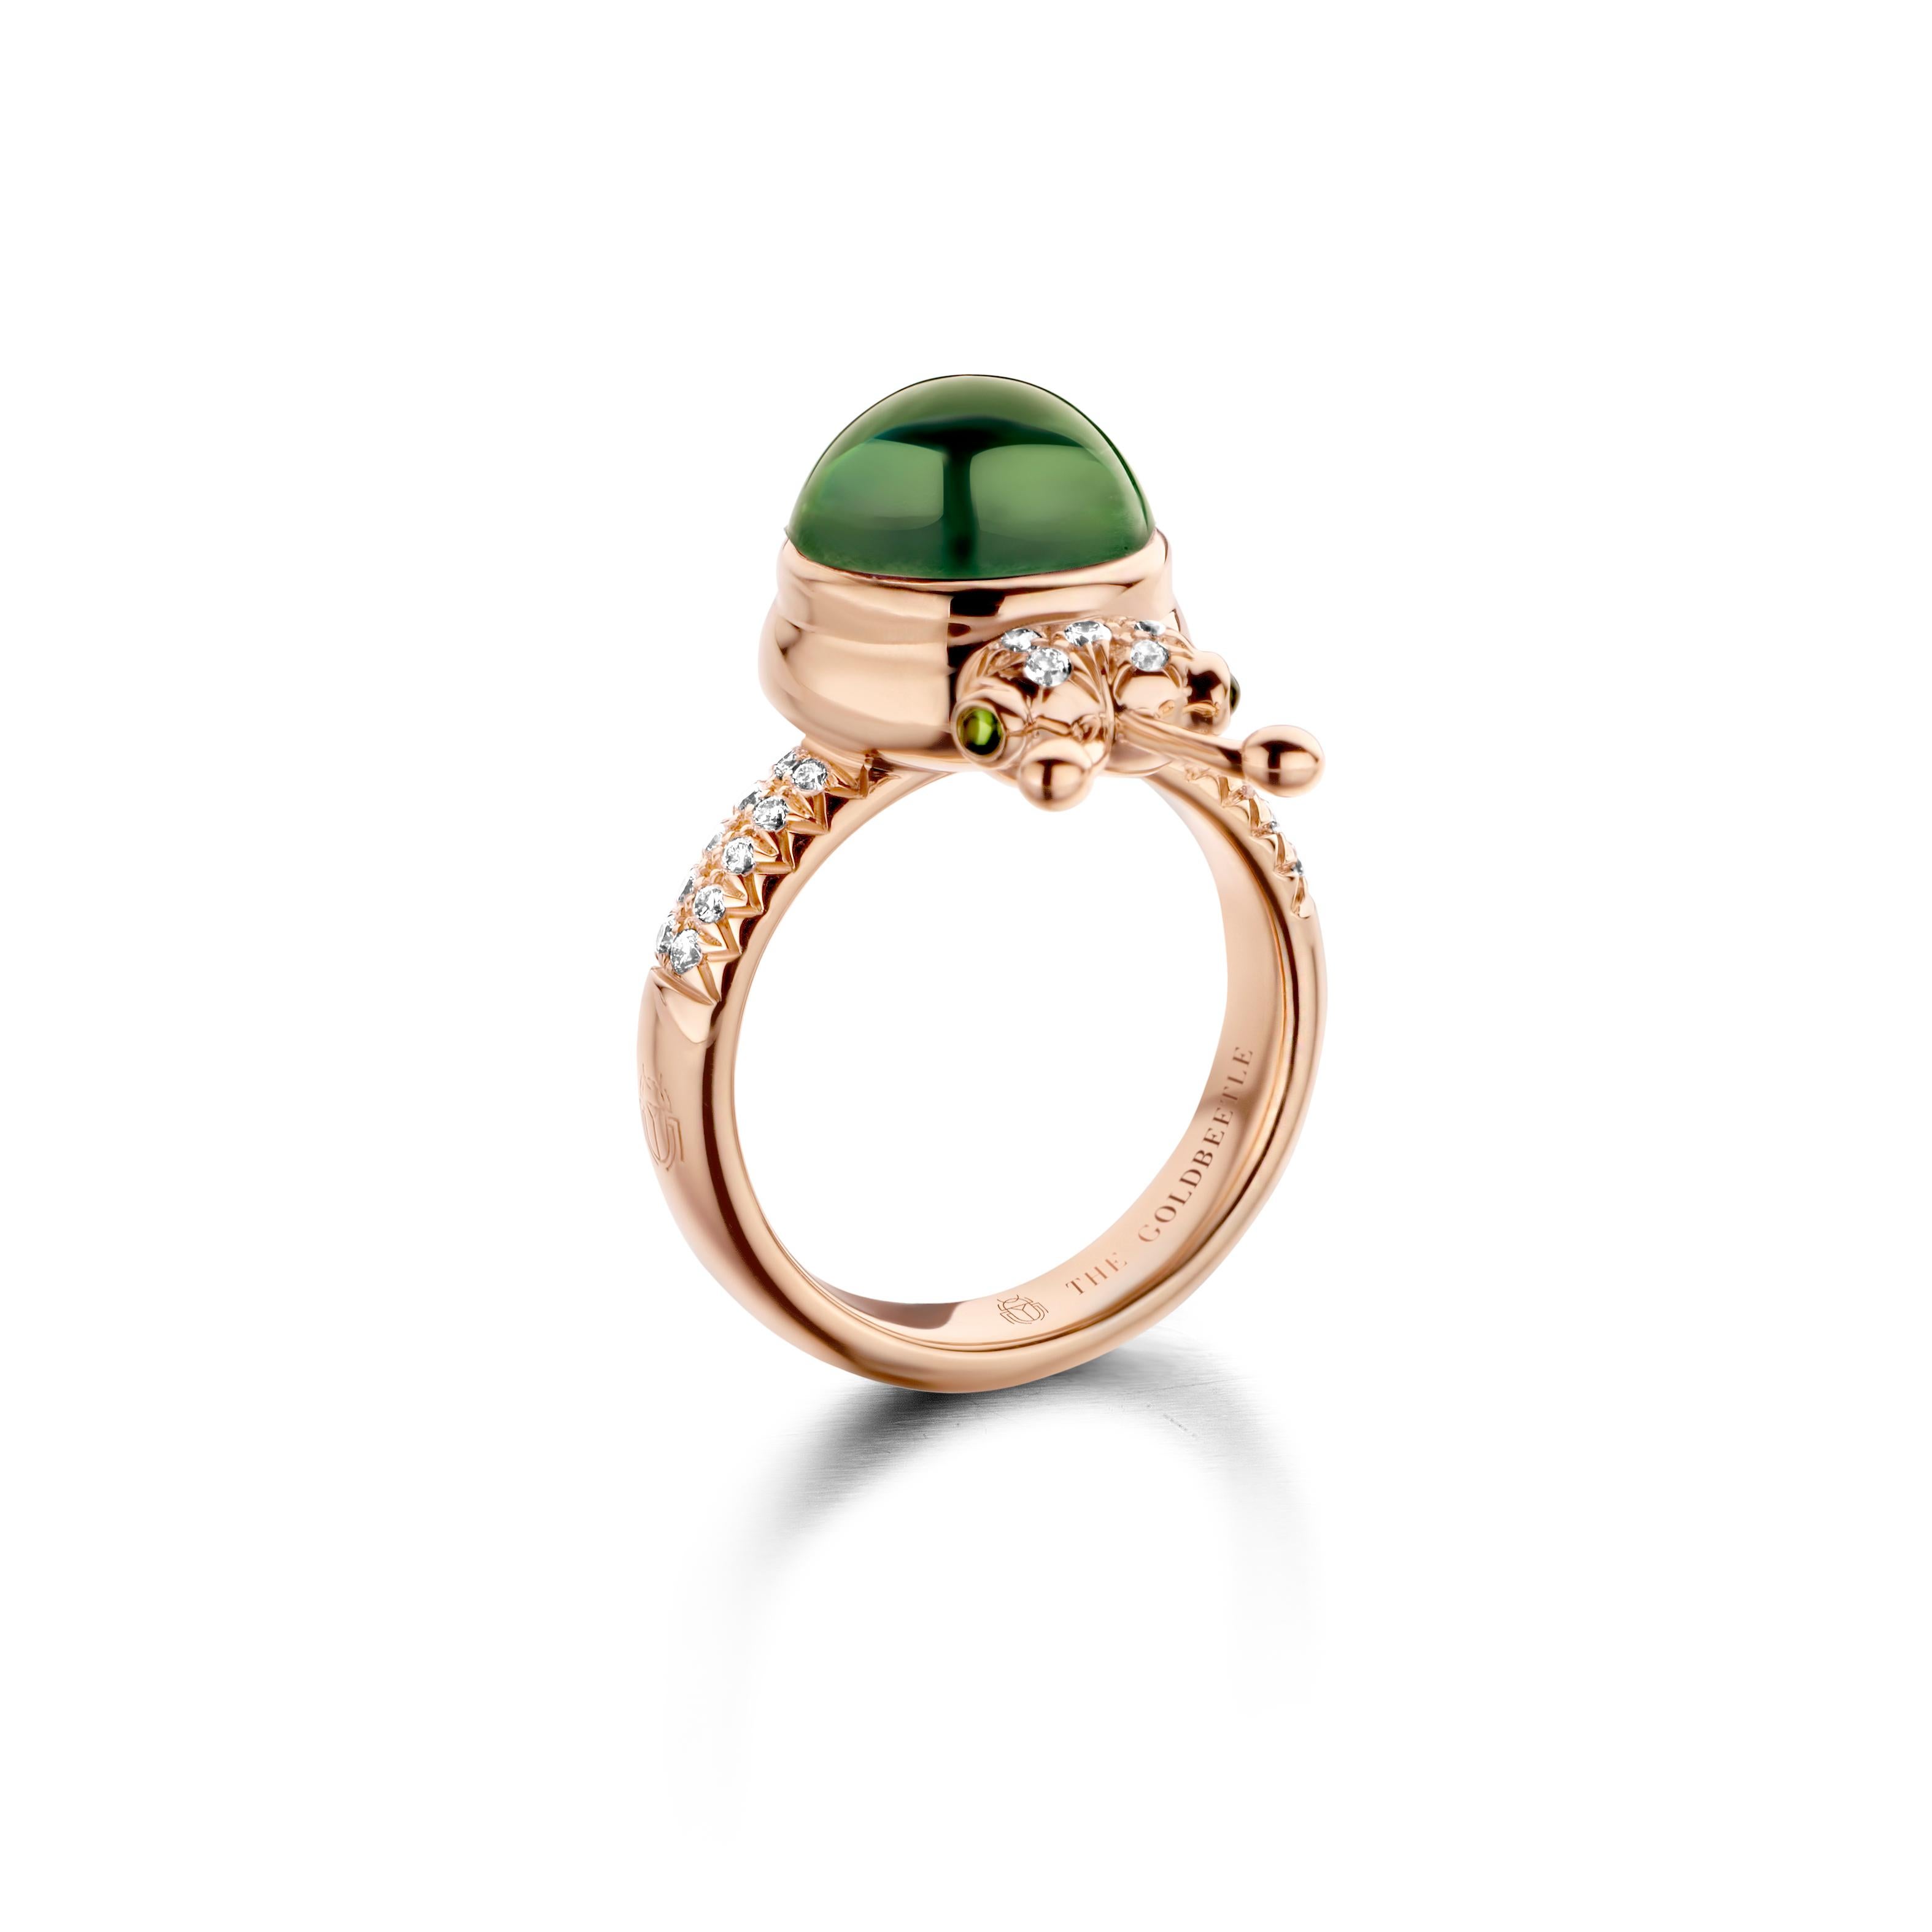 One of a kind lucky beetle ring in 18K rose gold 10g set with the finest diamonds in brilliant cut 0,23Ct (VVS/DEF quality) one natural, green tourmaline in round cabouchon cut 4,20Ct and two pink tourmalines in round cabouchon cut. 

Celine